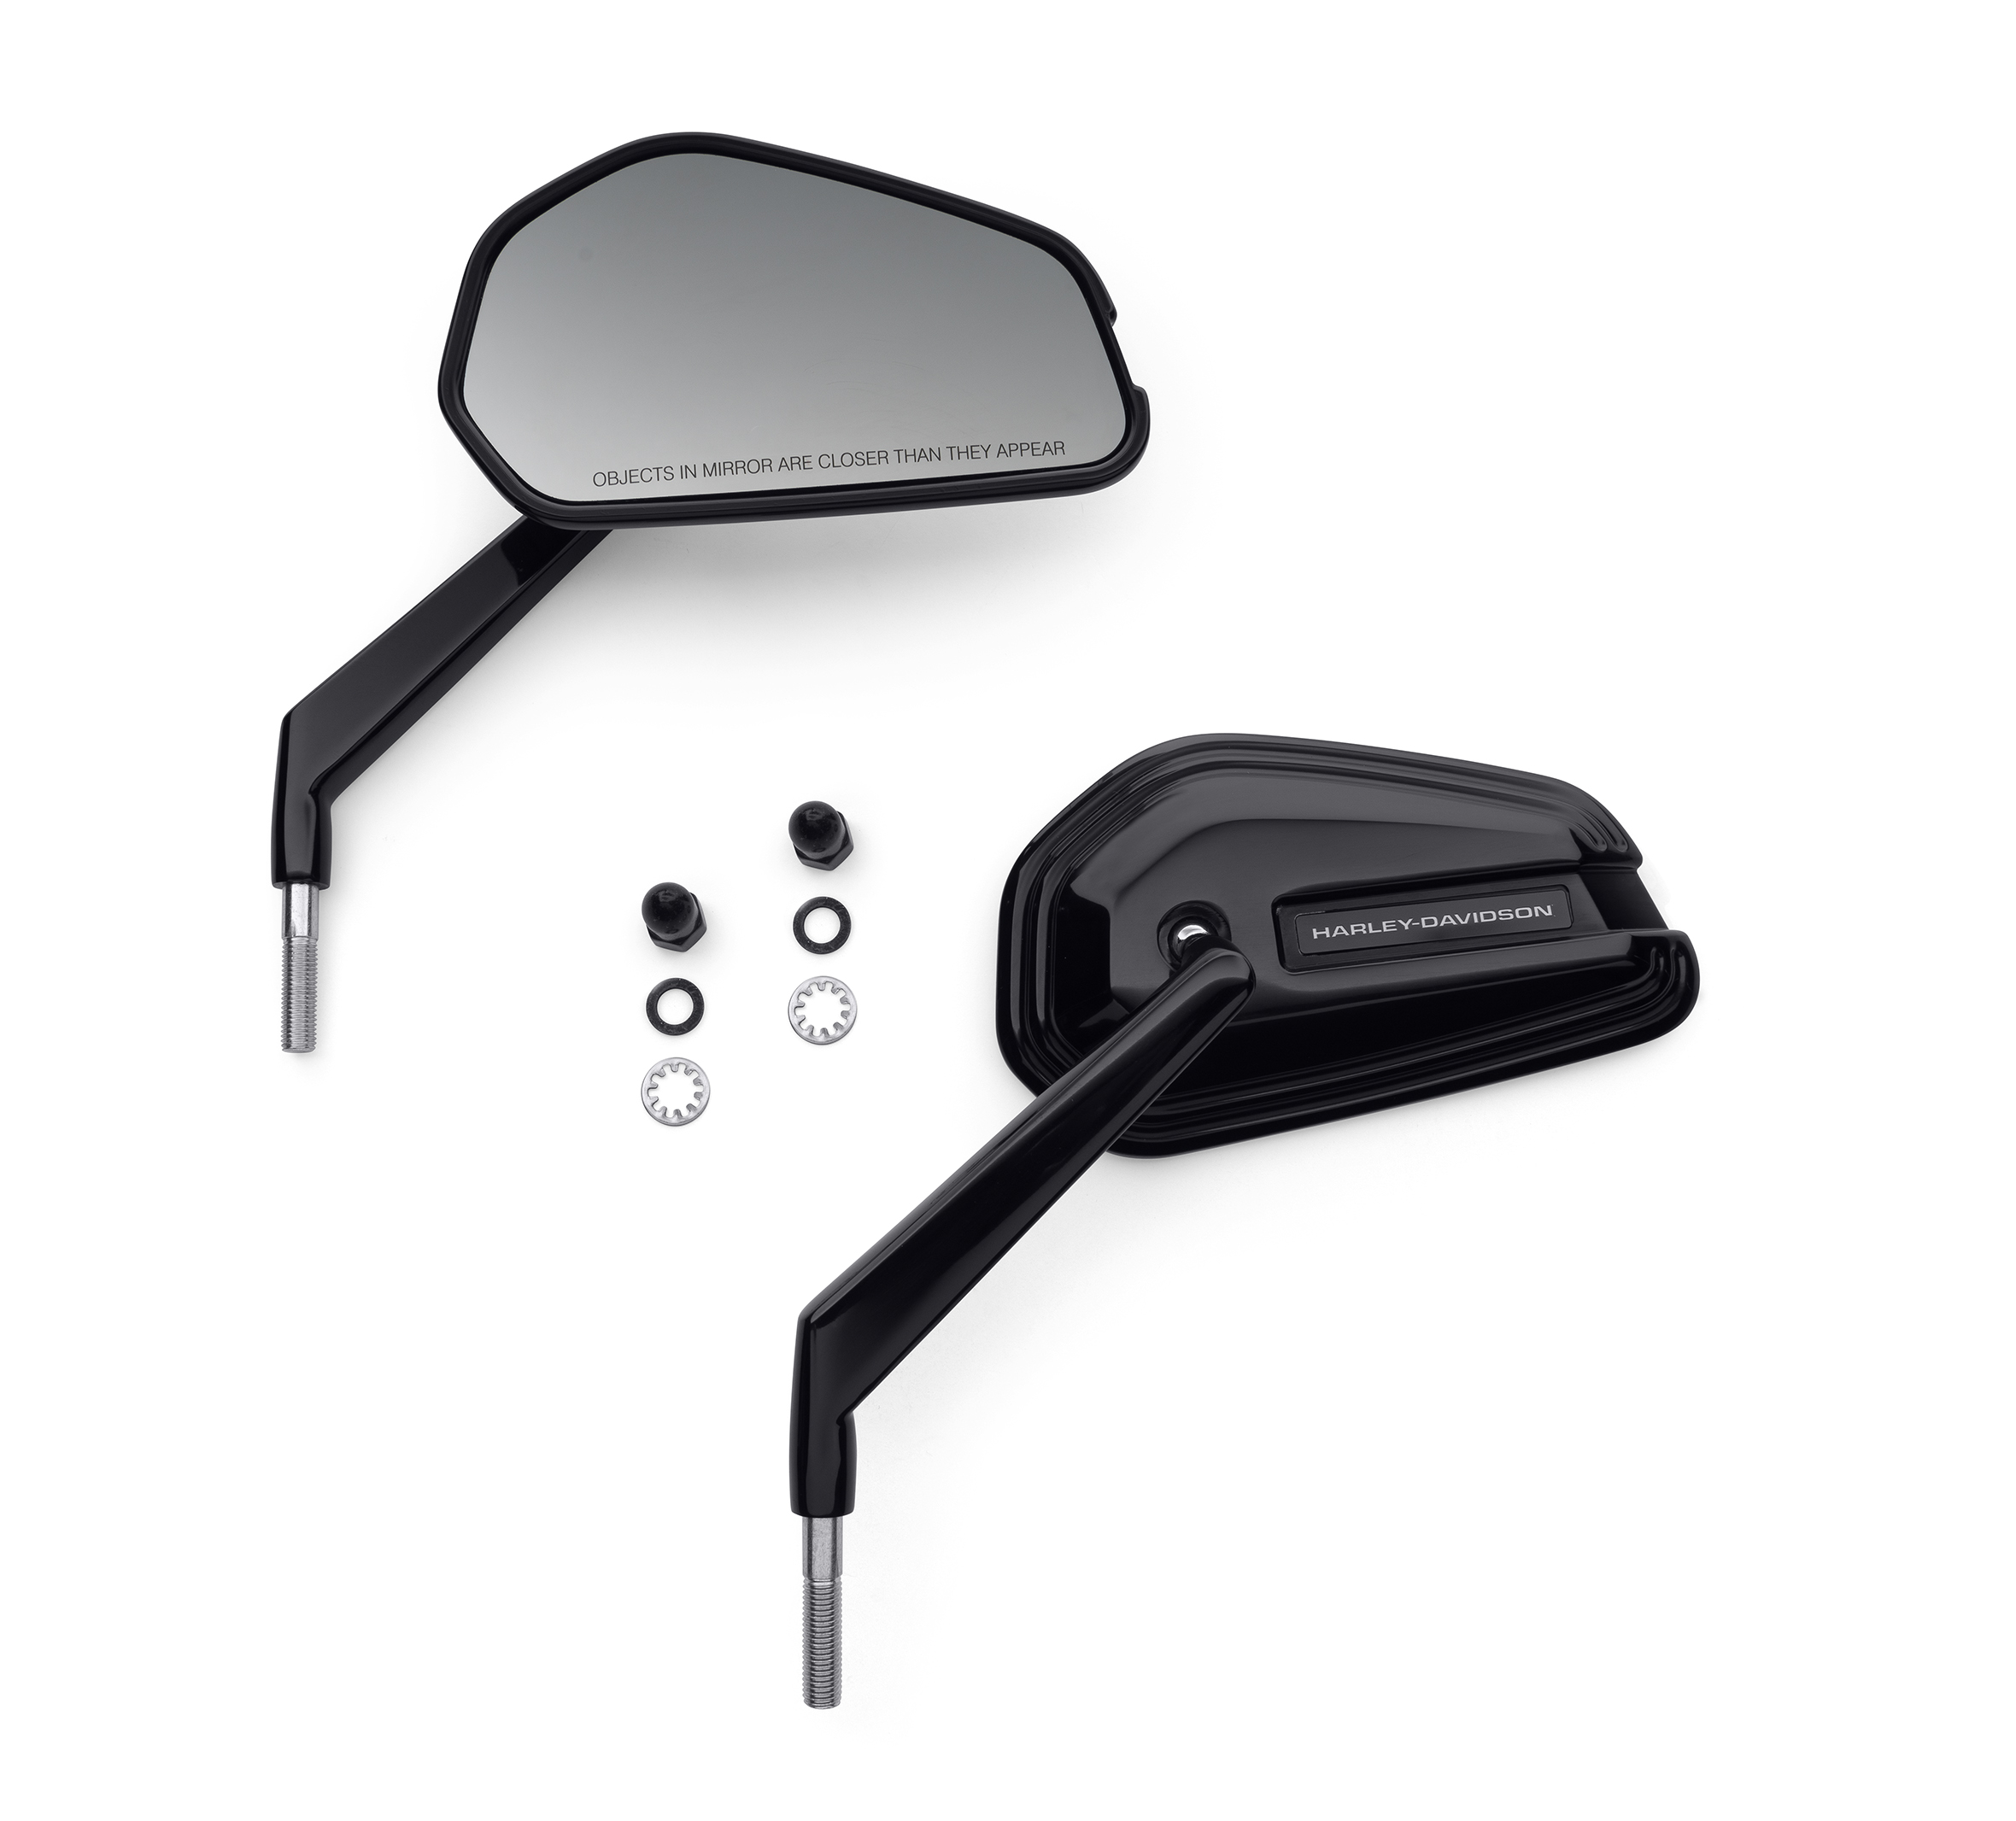 Chrome Motobiker 1Pair Motorcycle Mirrors for Road King Sportster Street Glide Electra Glide Dyna Softail Road Glide 1982-2019 